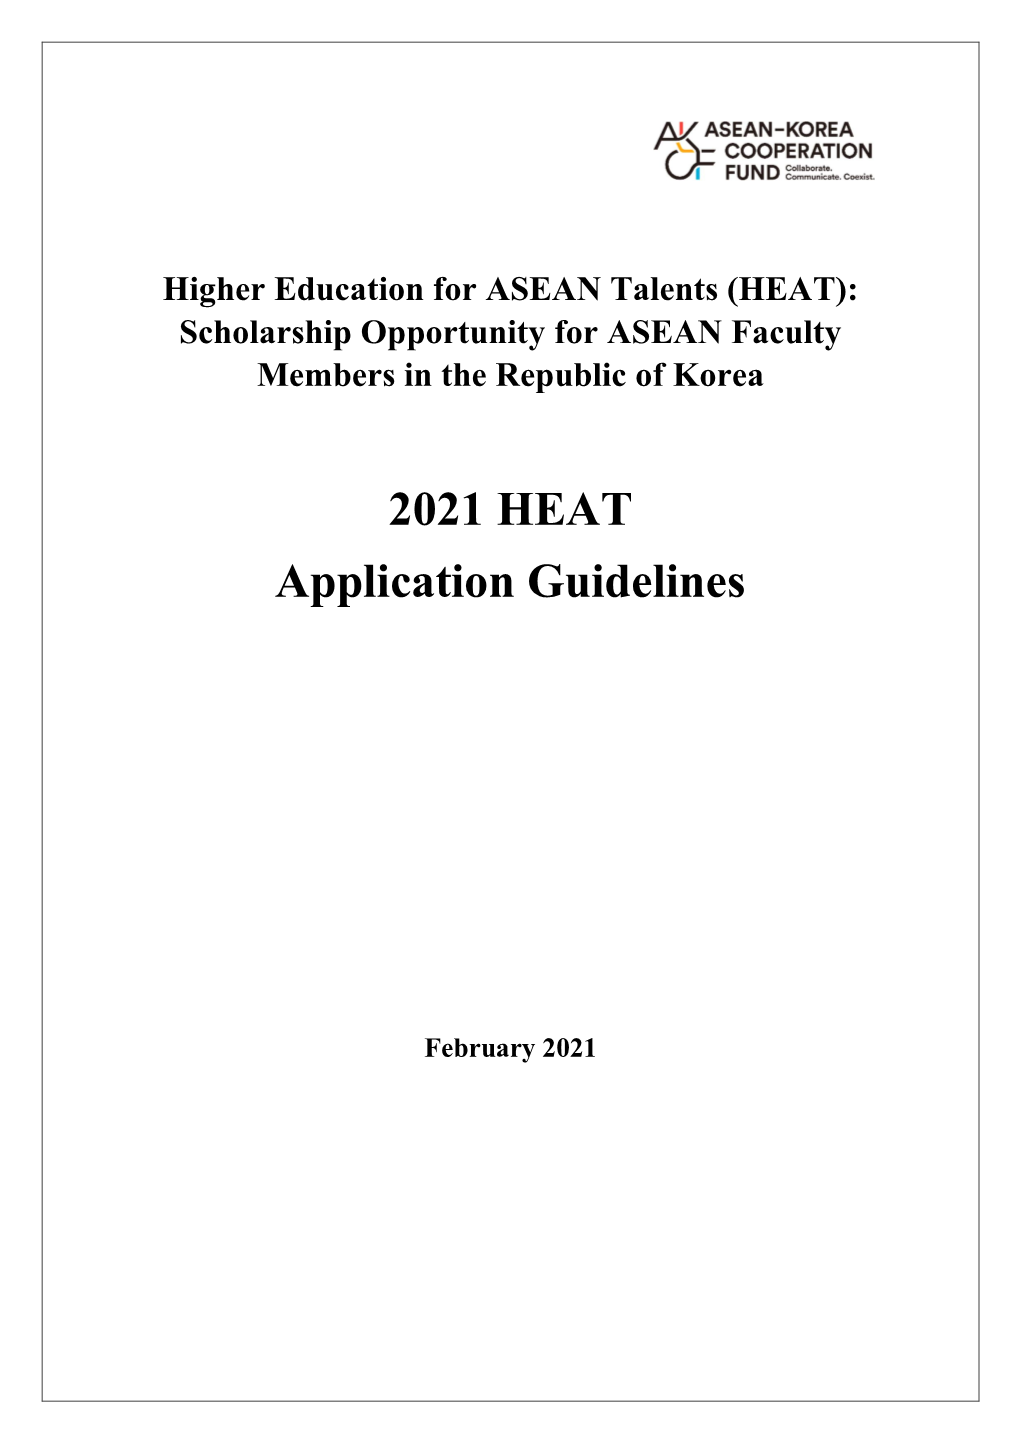 2021 HEAT Application Guidelines